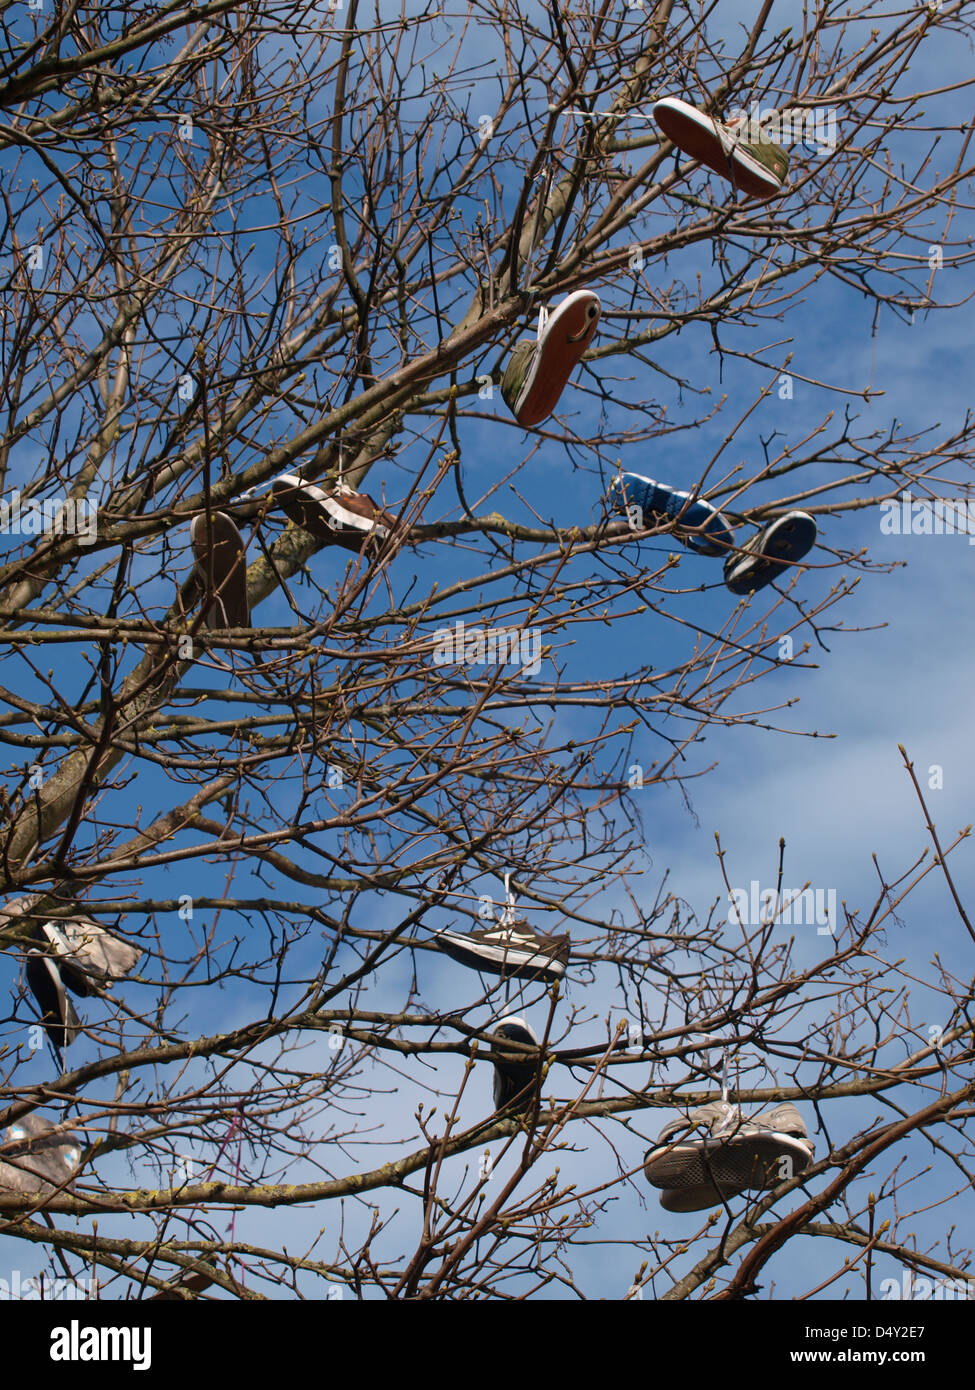 Shoes hanging in a tree, UK 2013 Stock Photo